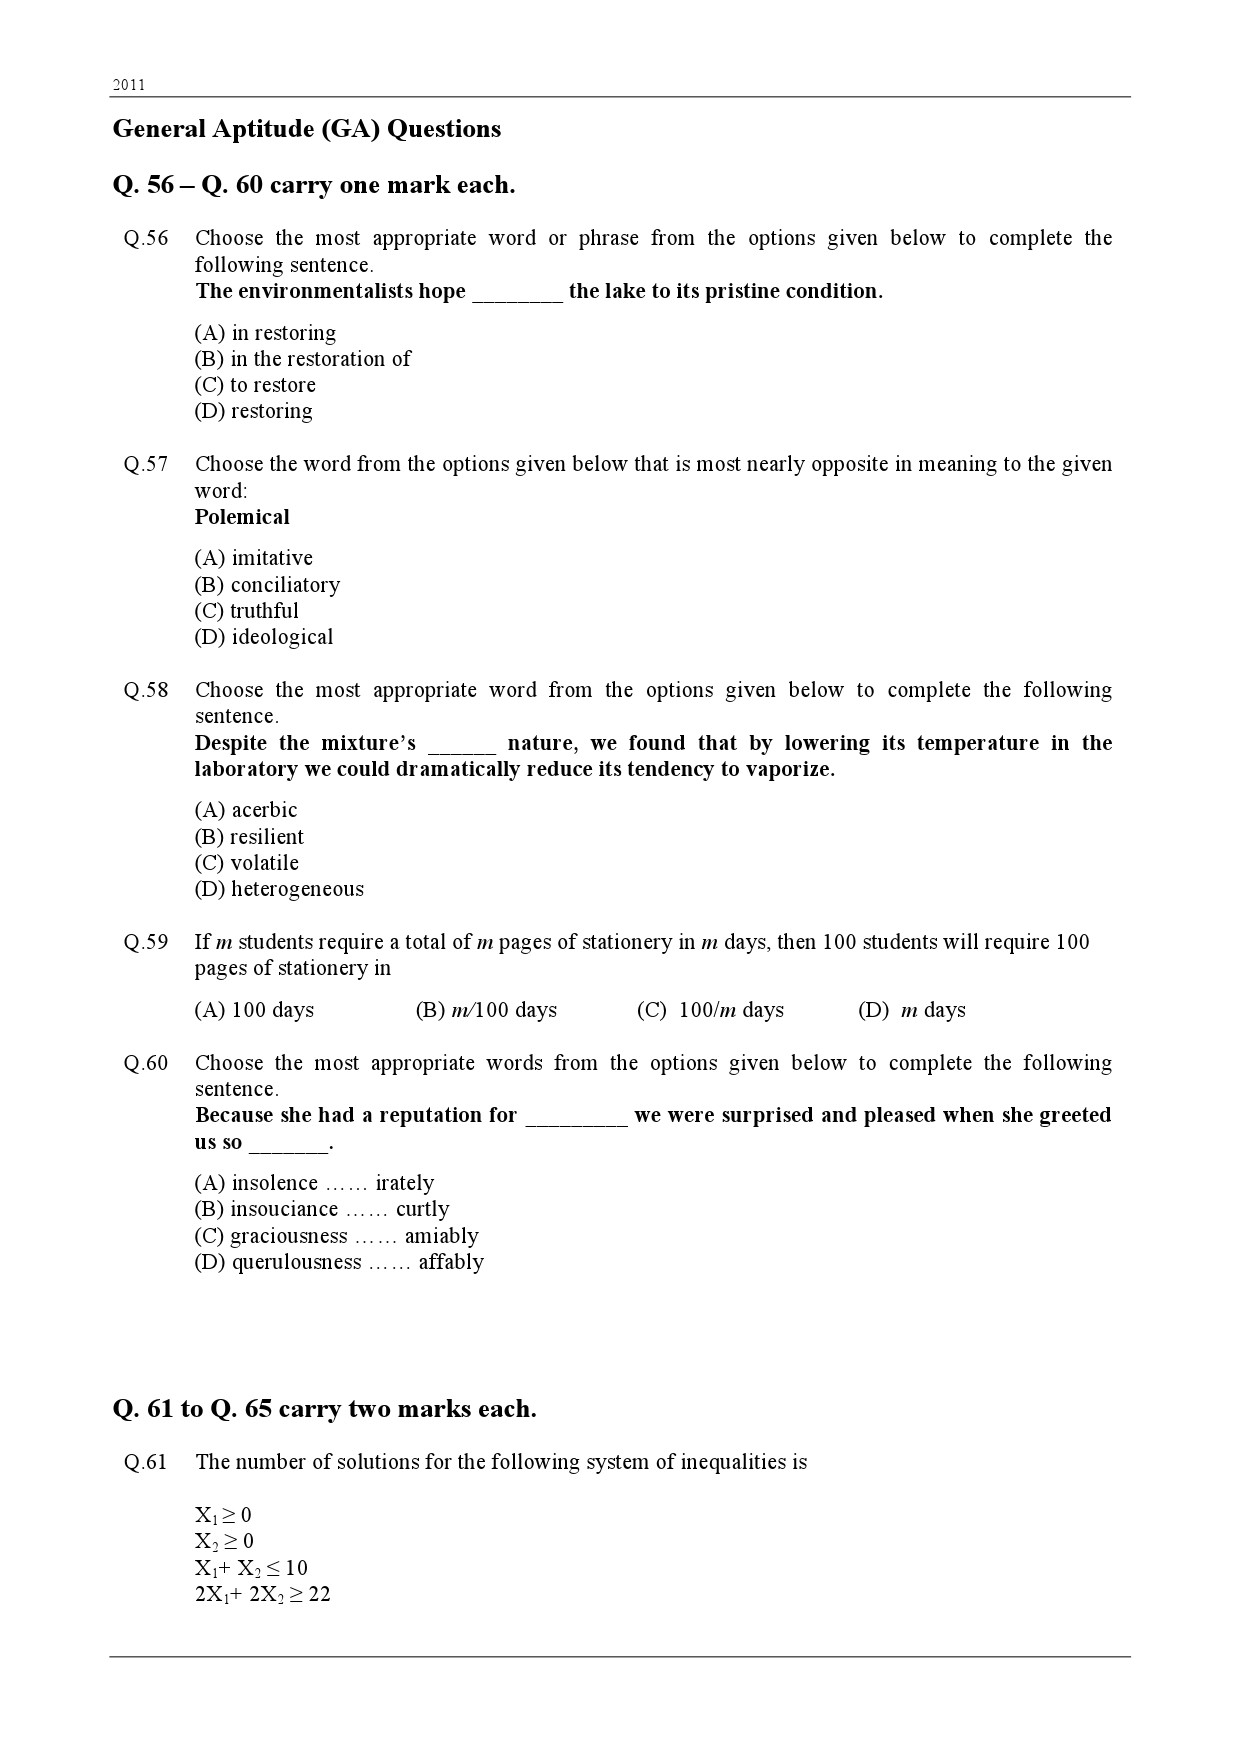 GATE Exam Question Paper 2011 Textile Engineering and Fibre Science 10